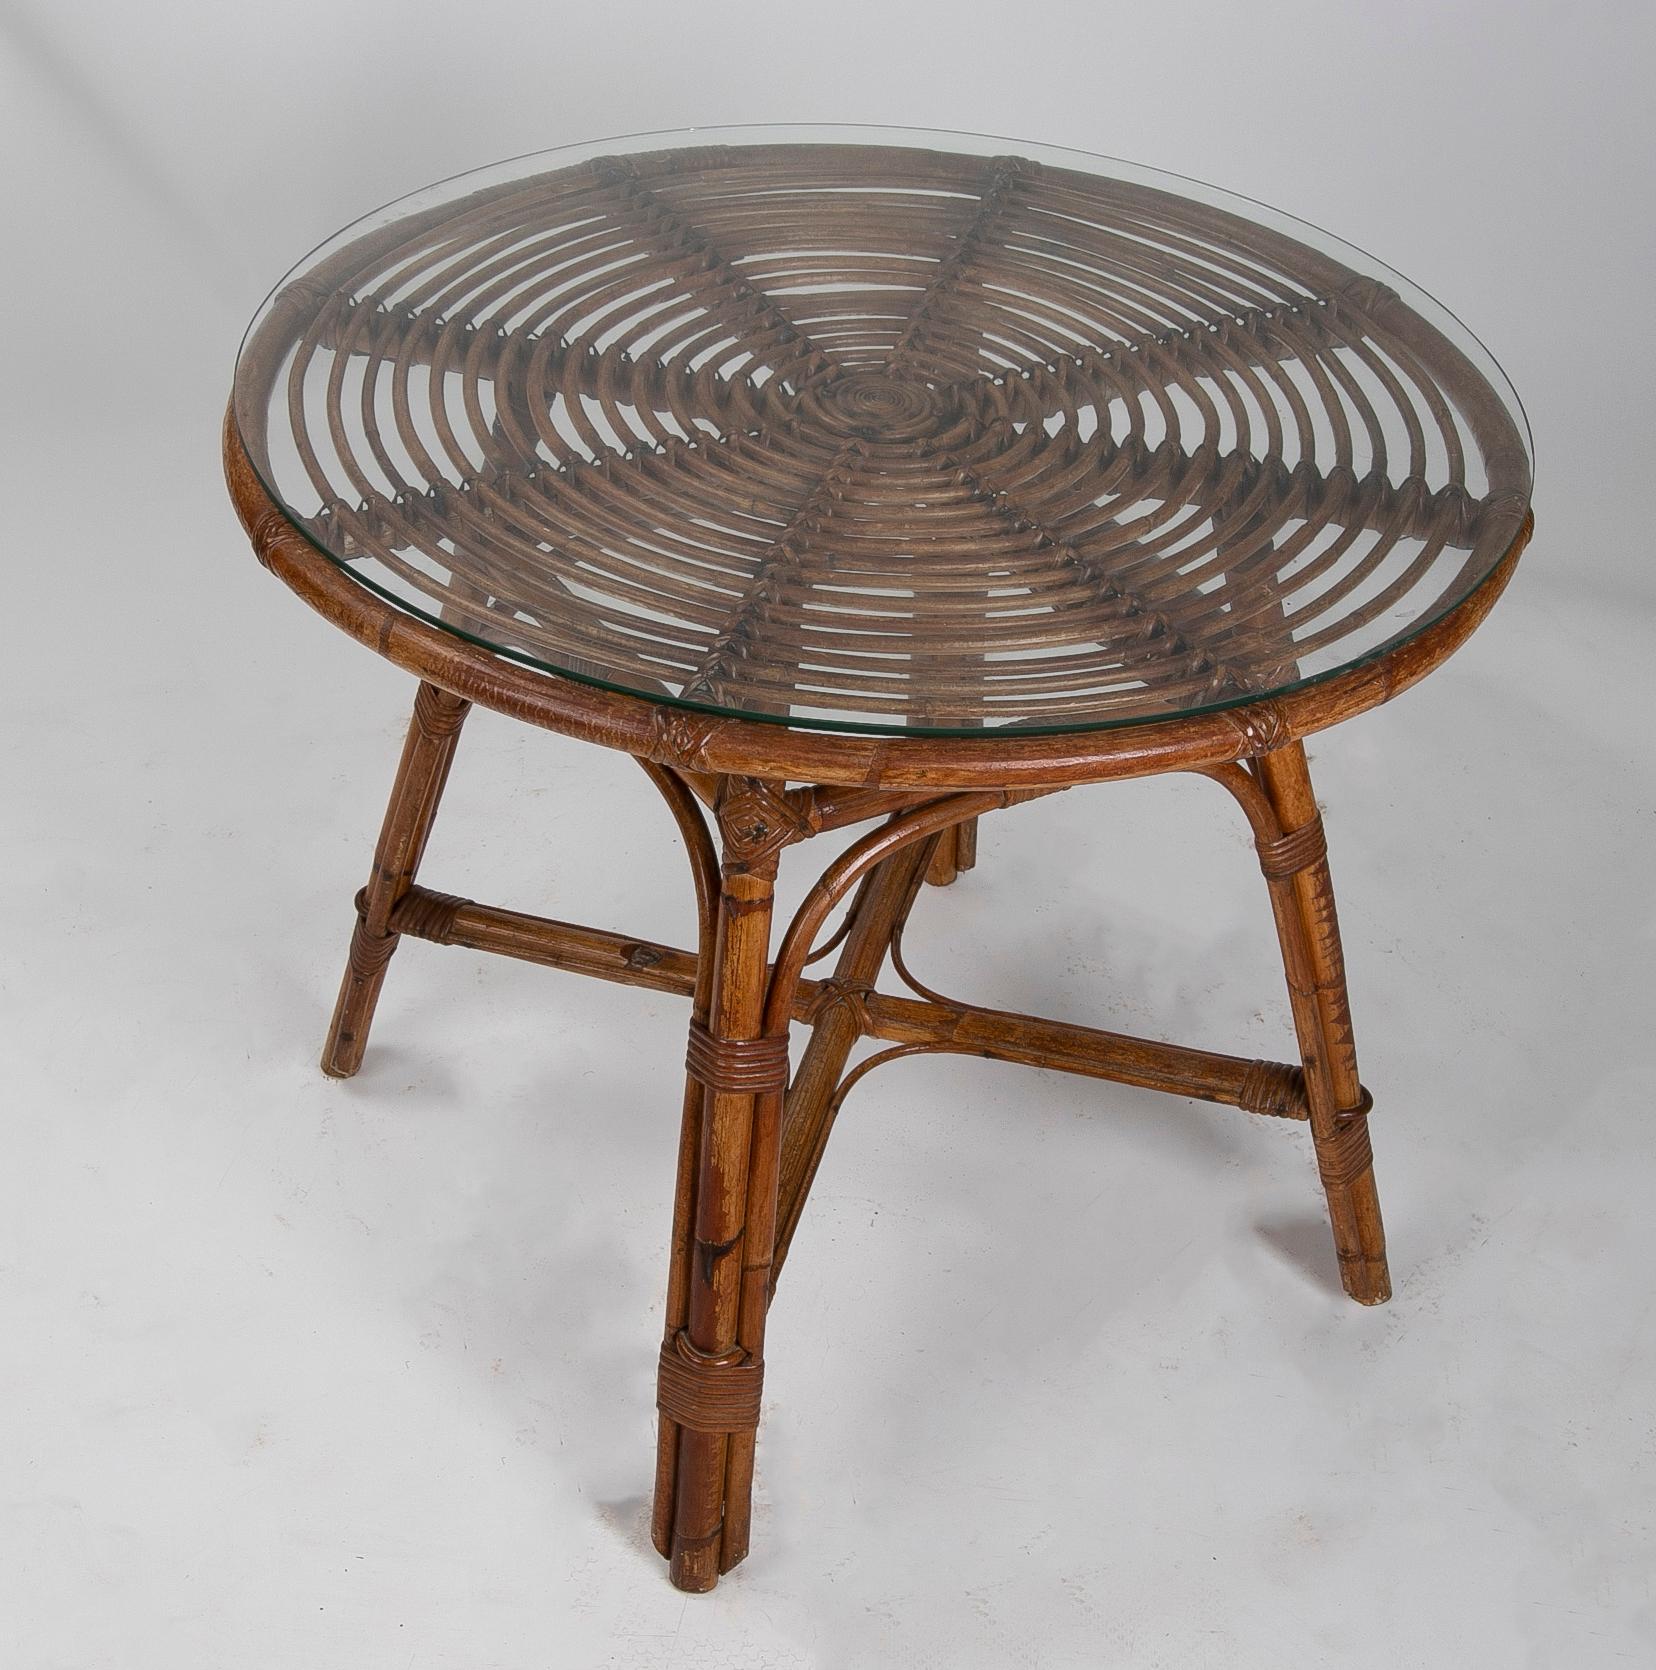 1980s Bamboo and Wicker Round Table and Chair Set For Sale 3